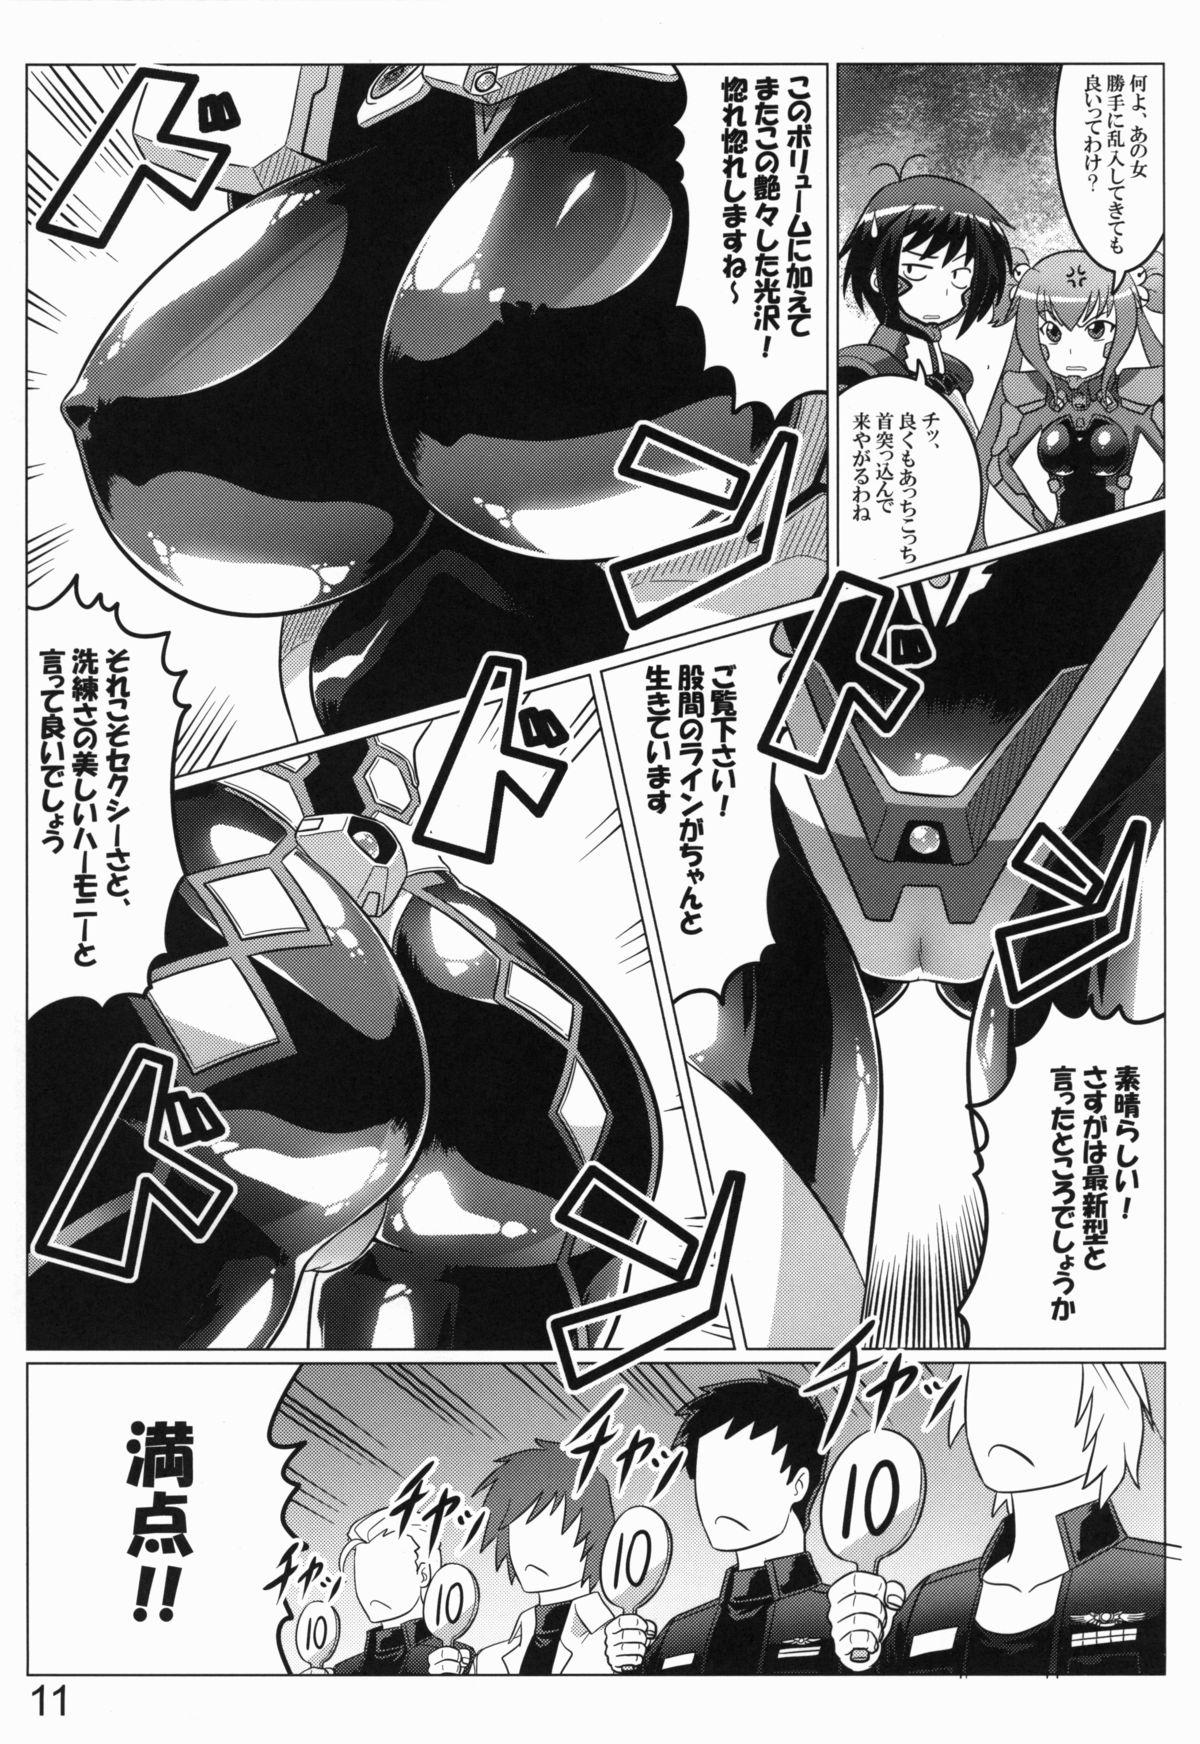 Perfect Pussy 0-Shiki LOVE - Muv-luv alternative total eclipse Groupfuck - Page 10